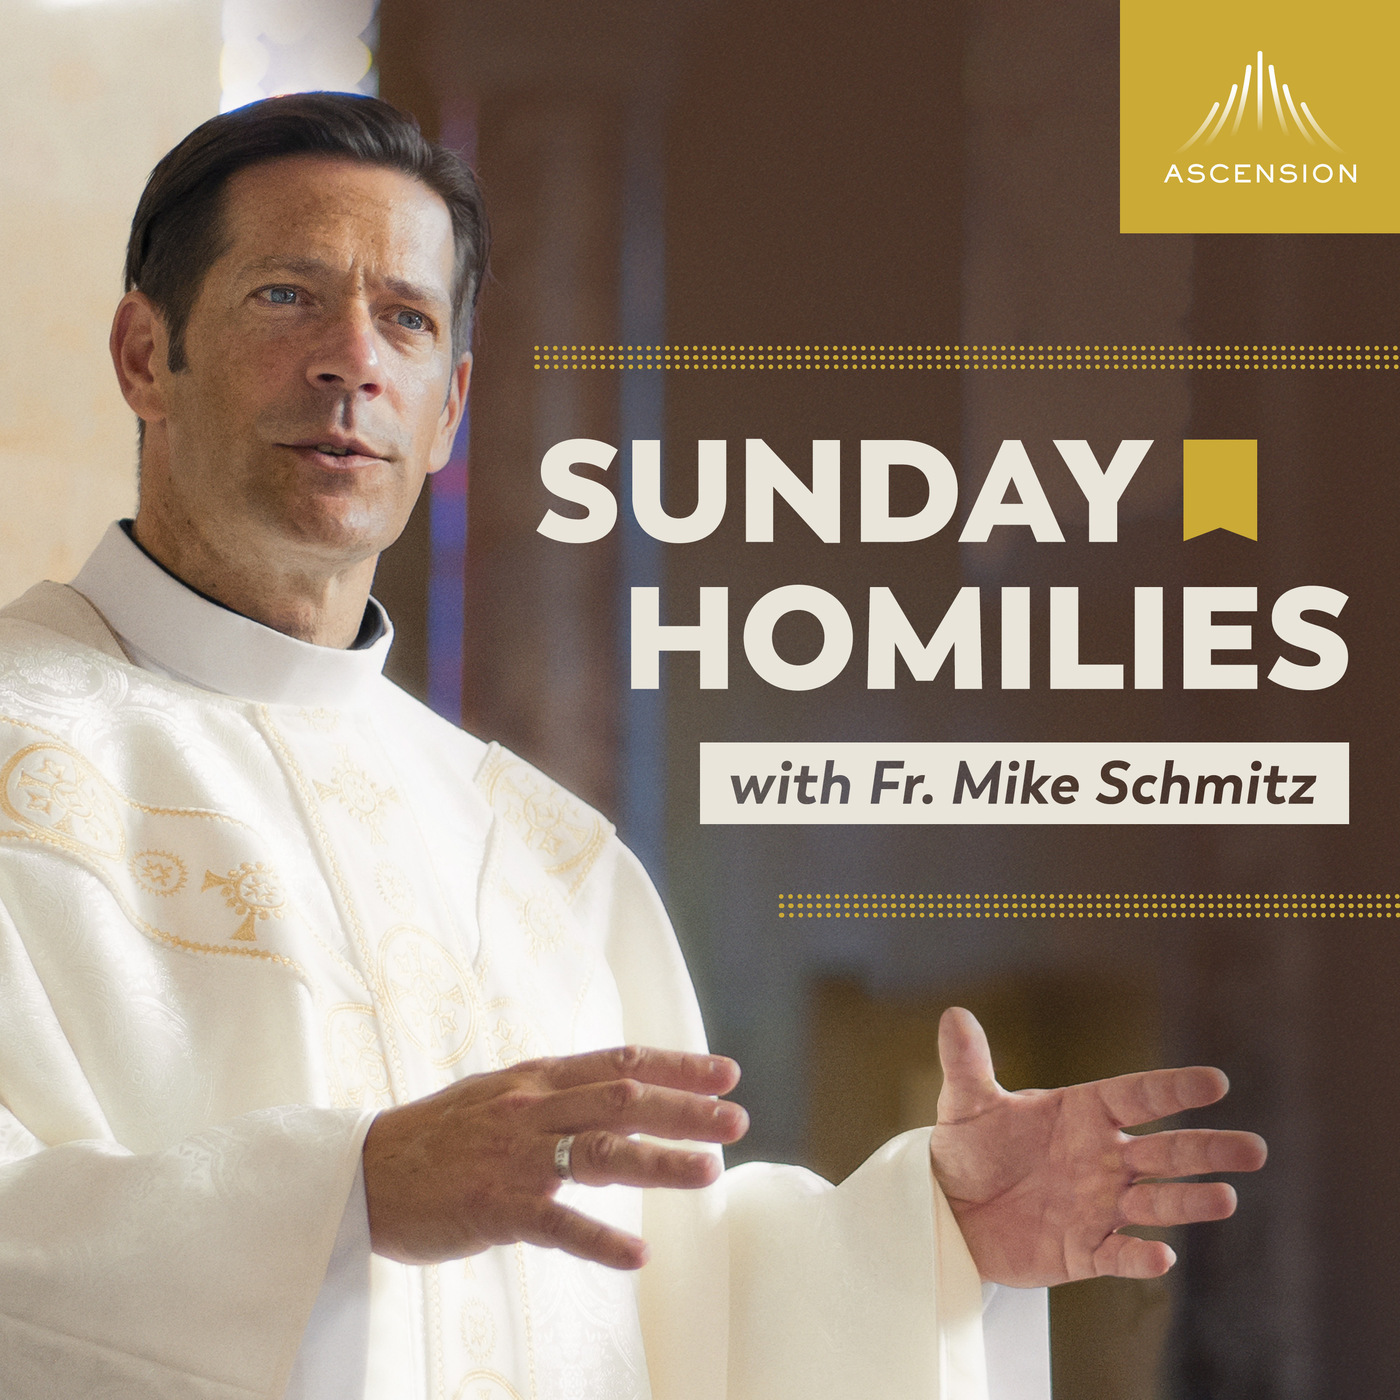 Sunday Homilies with Fr. Mike Schmitz 07/31/22 Then What?